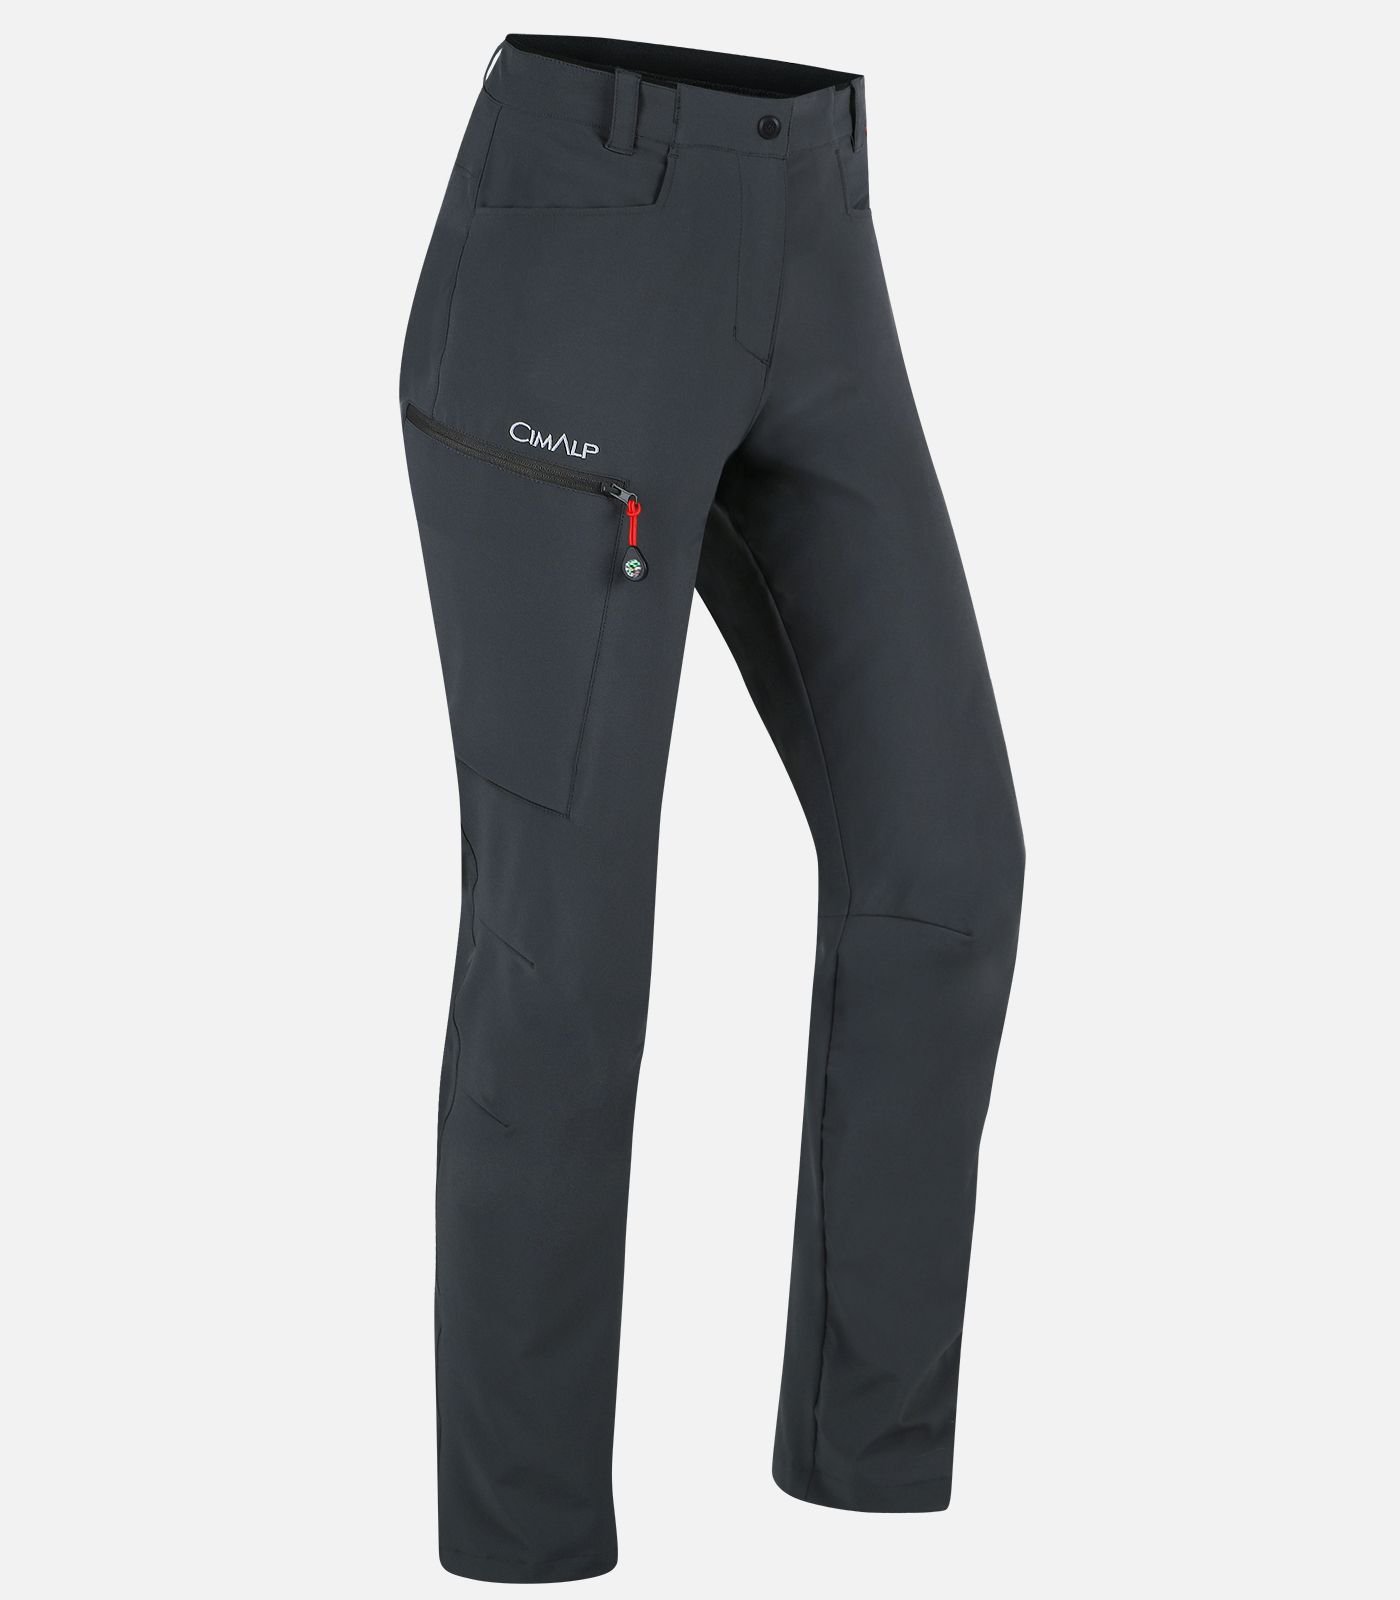 Details more than 76 lightweight hiking trousers super hot - in.duhocakina